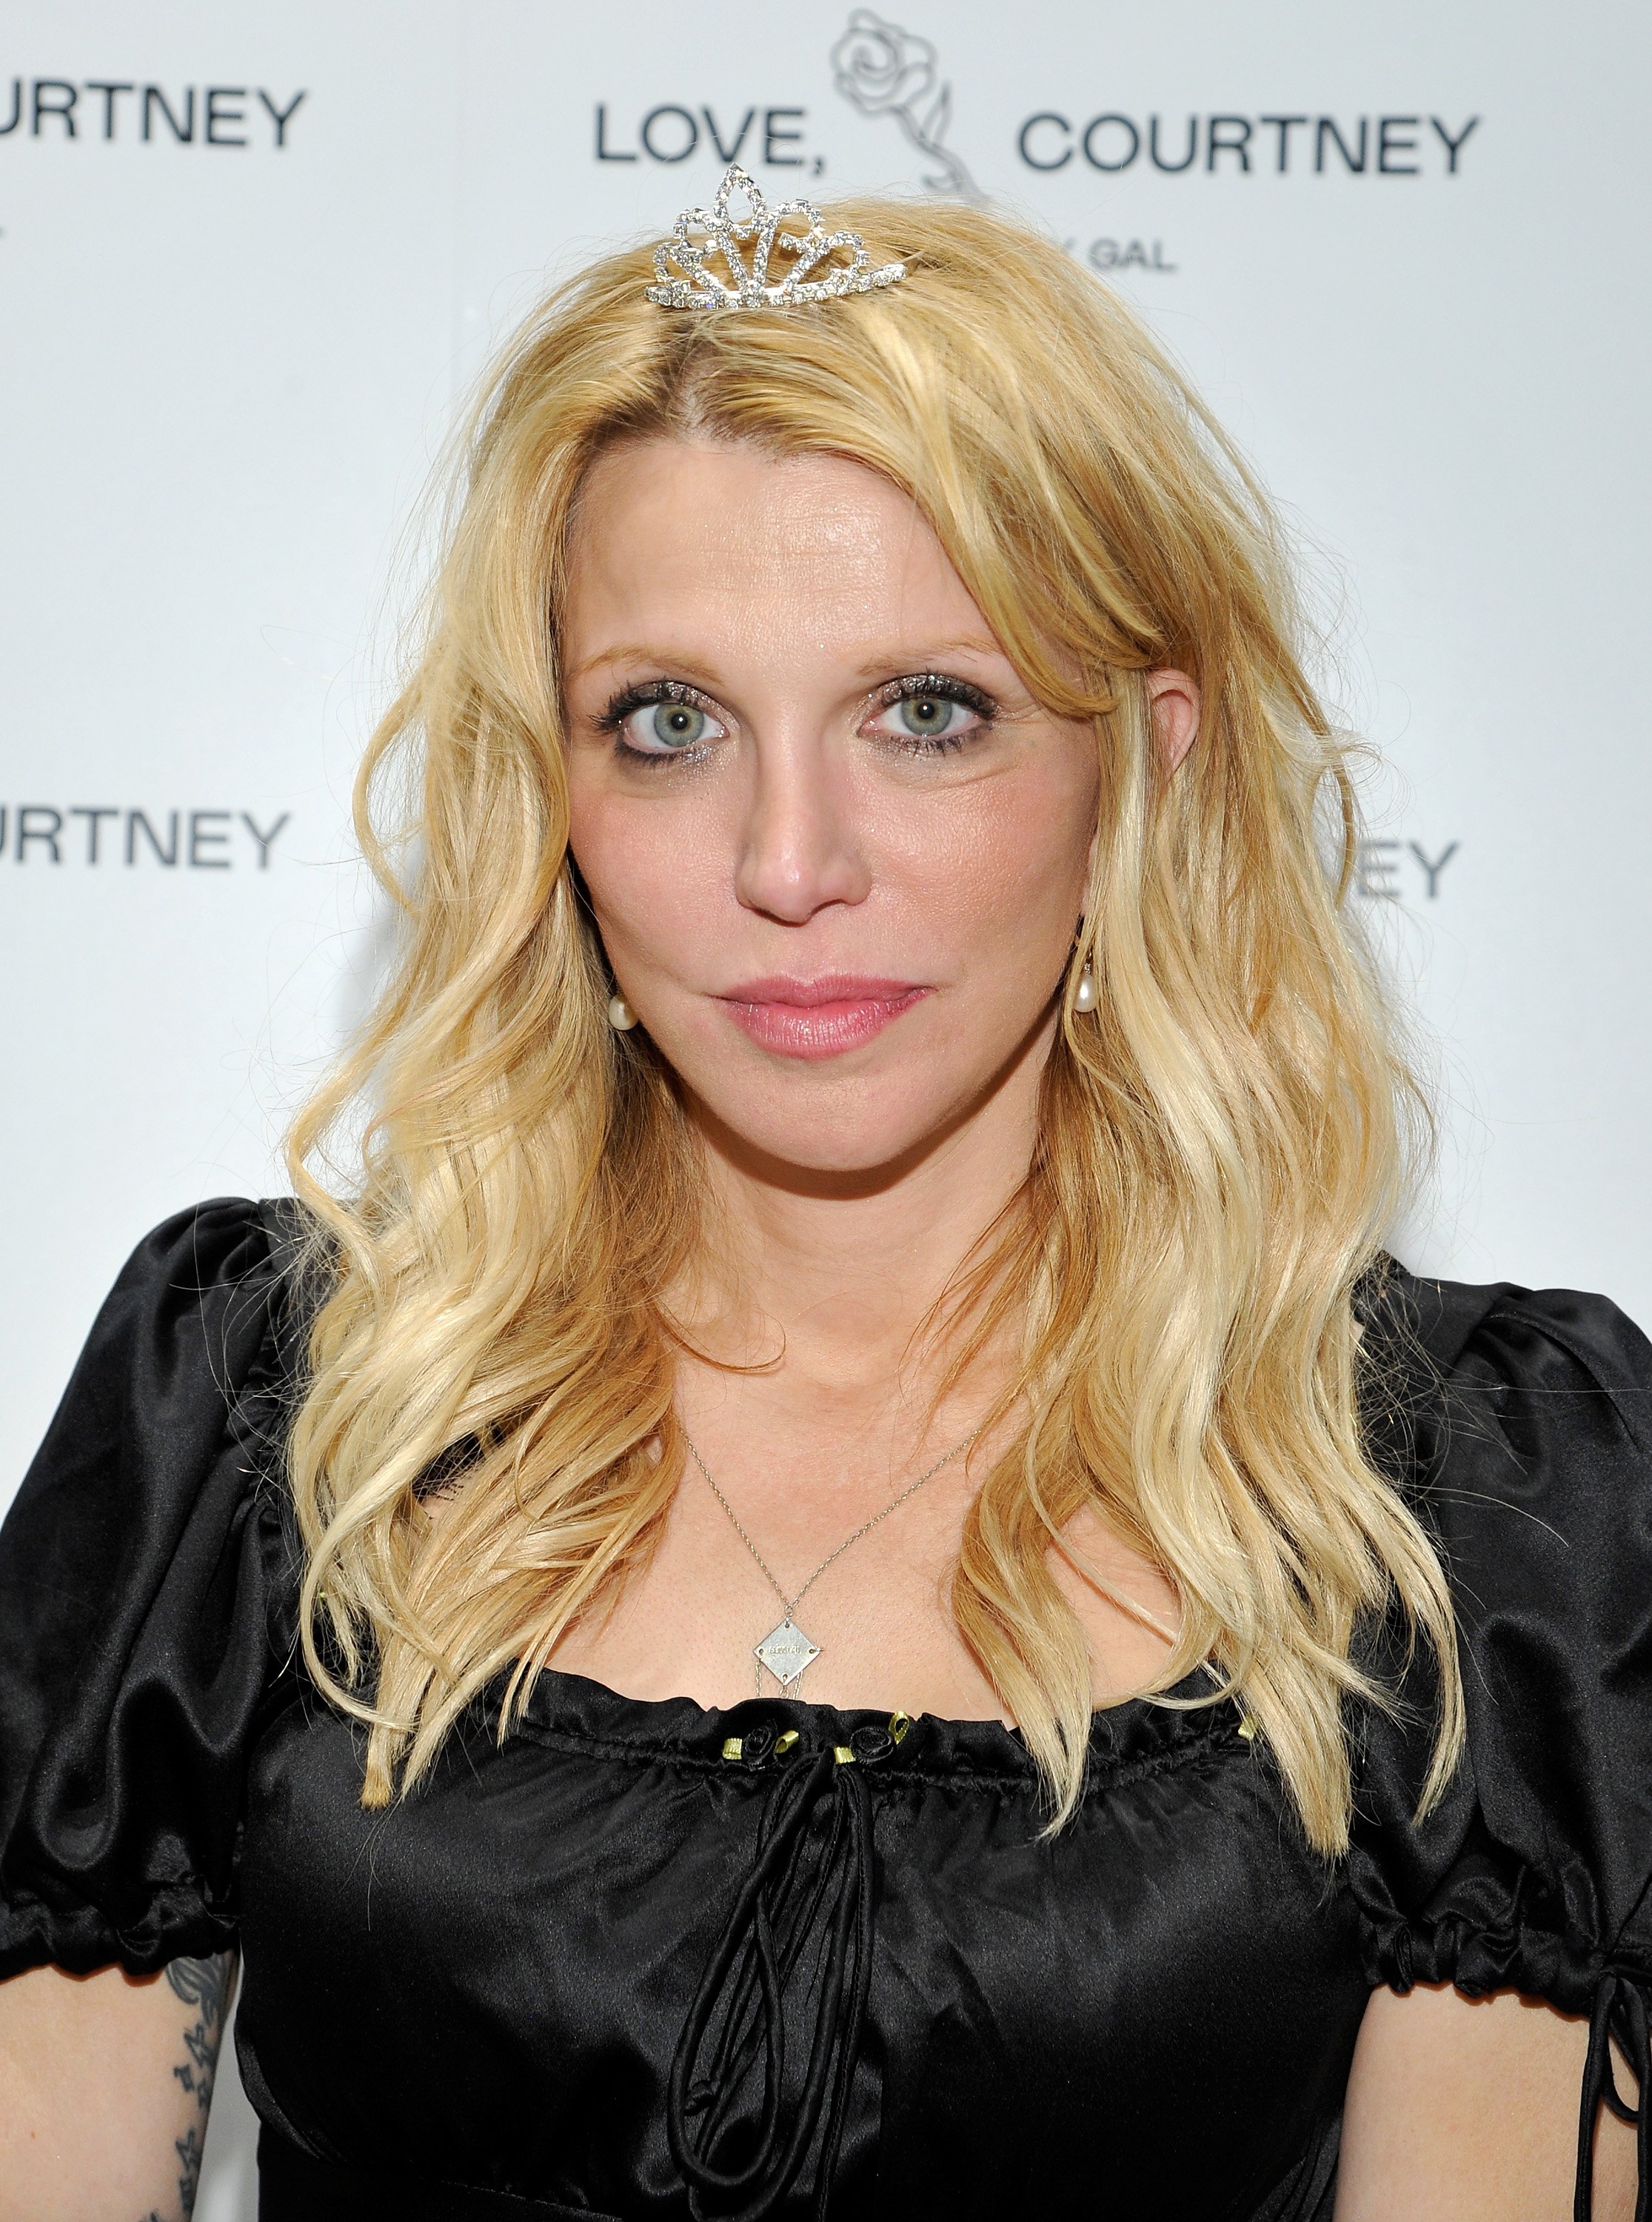 Courtney Love pictured at the Love, Courtney by Nasty Gal launch party, 2016, California. | Photo: Getty Images.